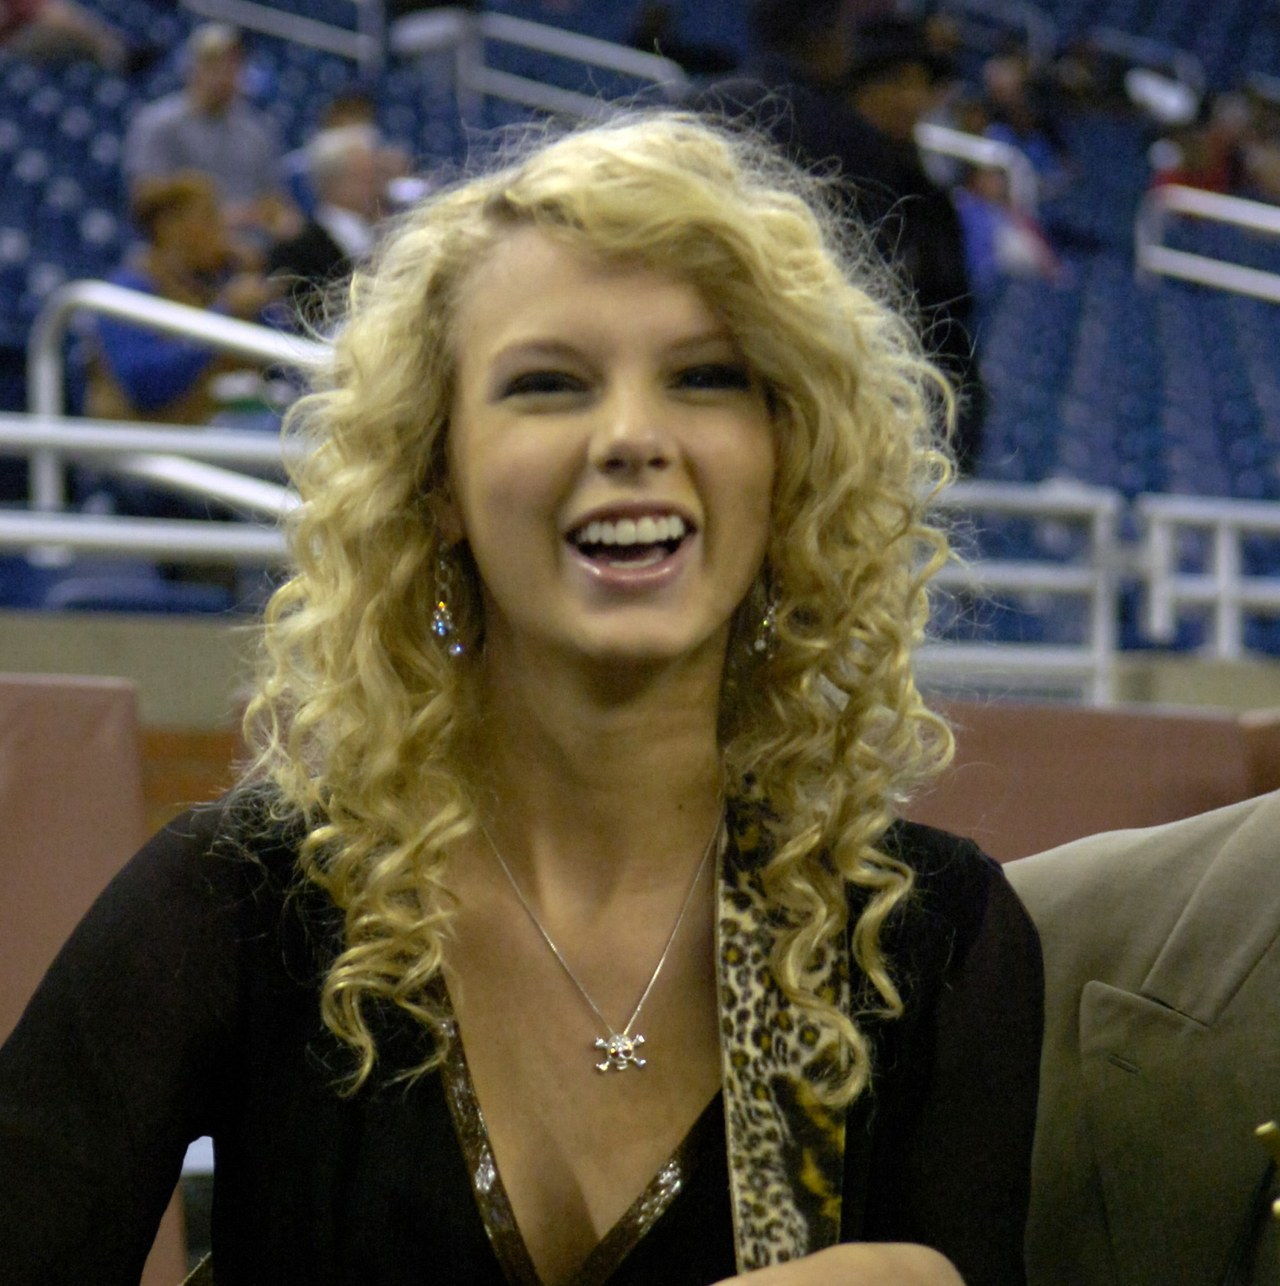 Taylor Swift sings the National Anthem as the Detroit Lions host the Miami Dolphins in a Thanksgiving Day game Nov. 23, 2006 in Detroit.